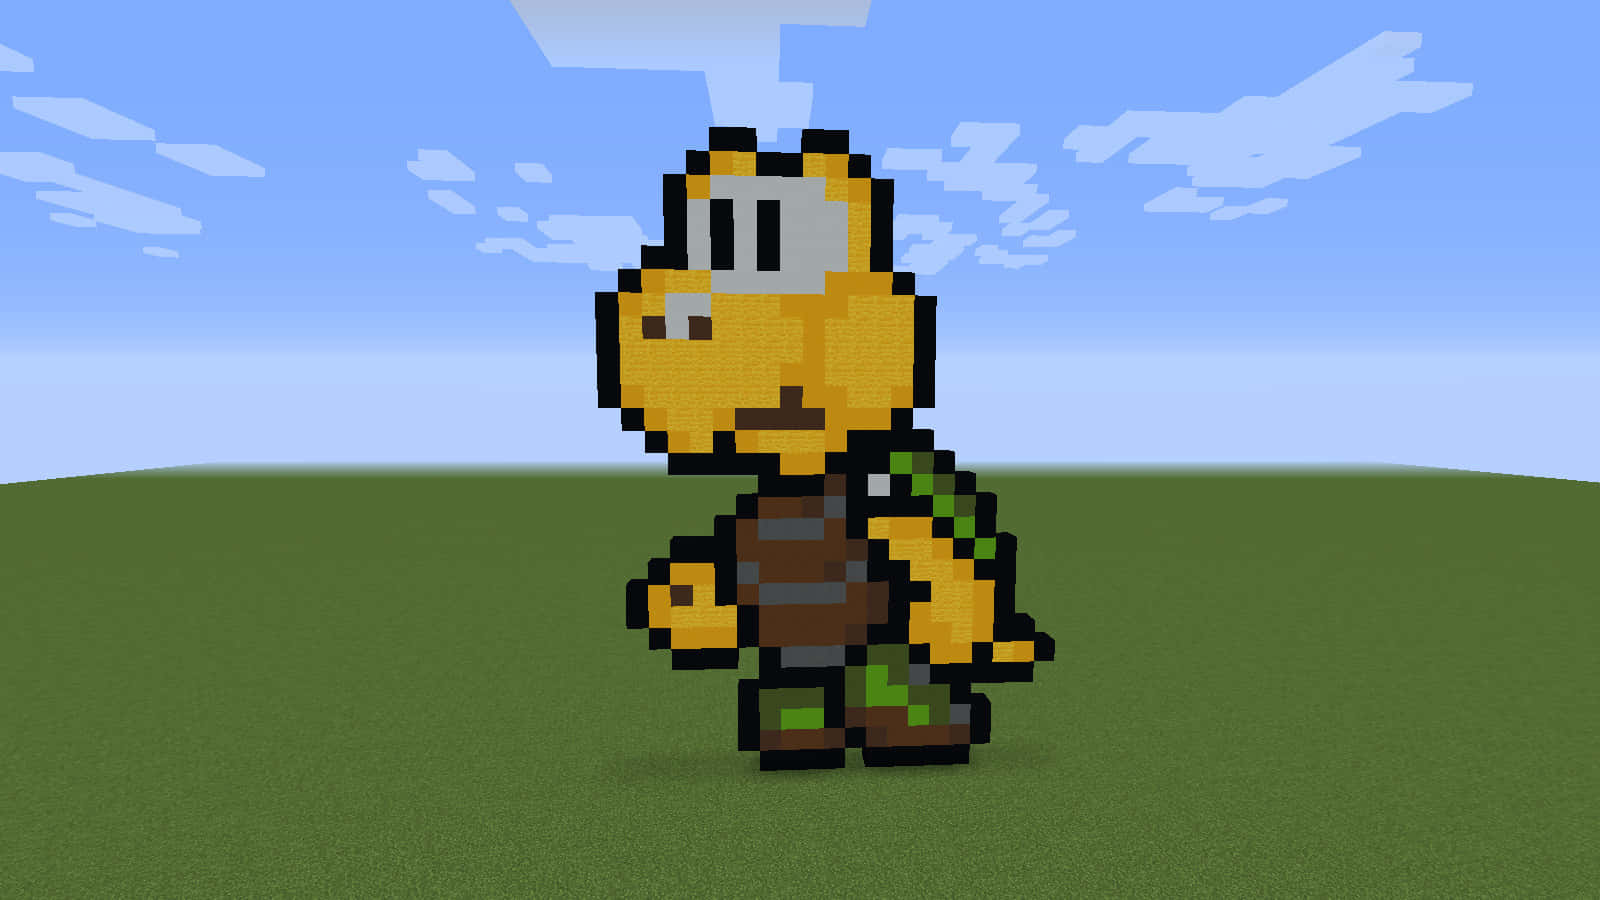 Green Koopa Troopa standing ready in a colorful world Wallpaper